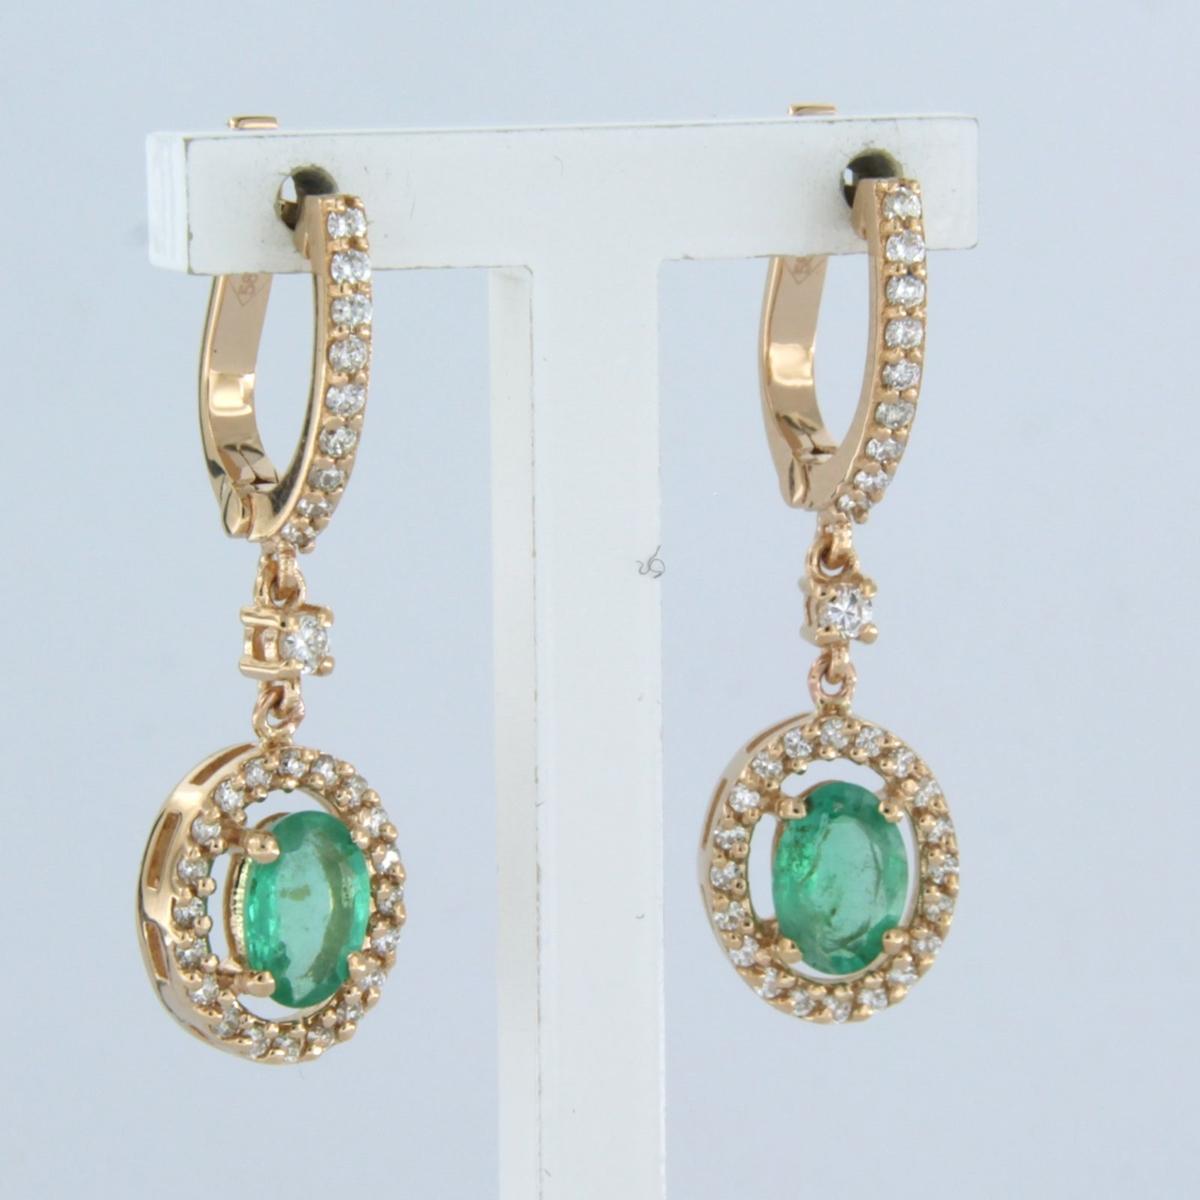 Brilliant Cut Earrings with Emerald and Diamonds 14k pink gold For Sale